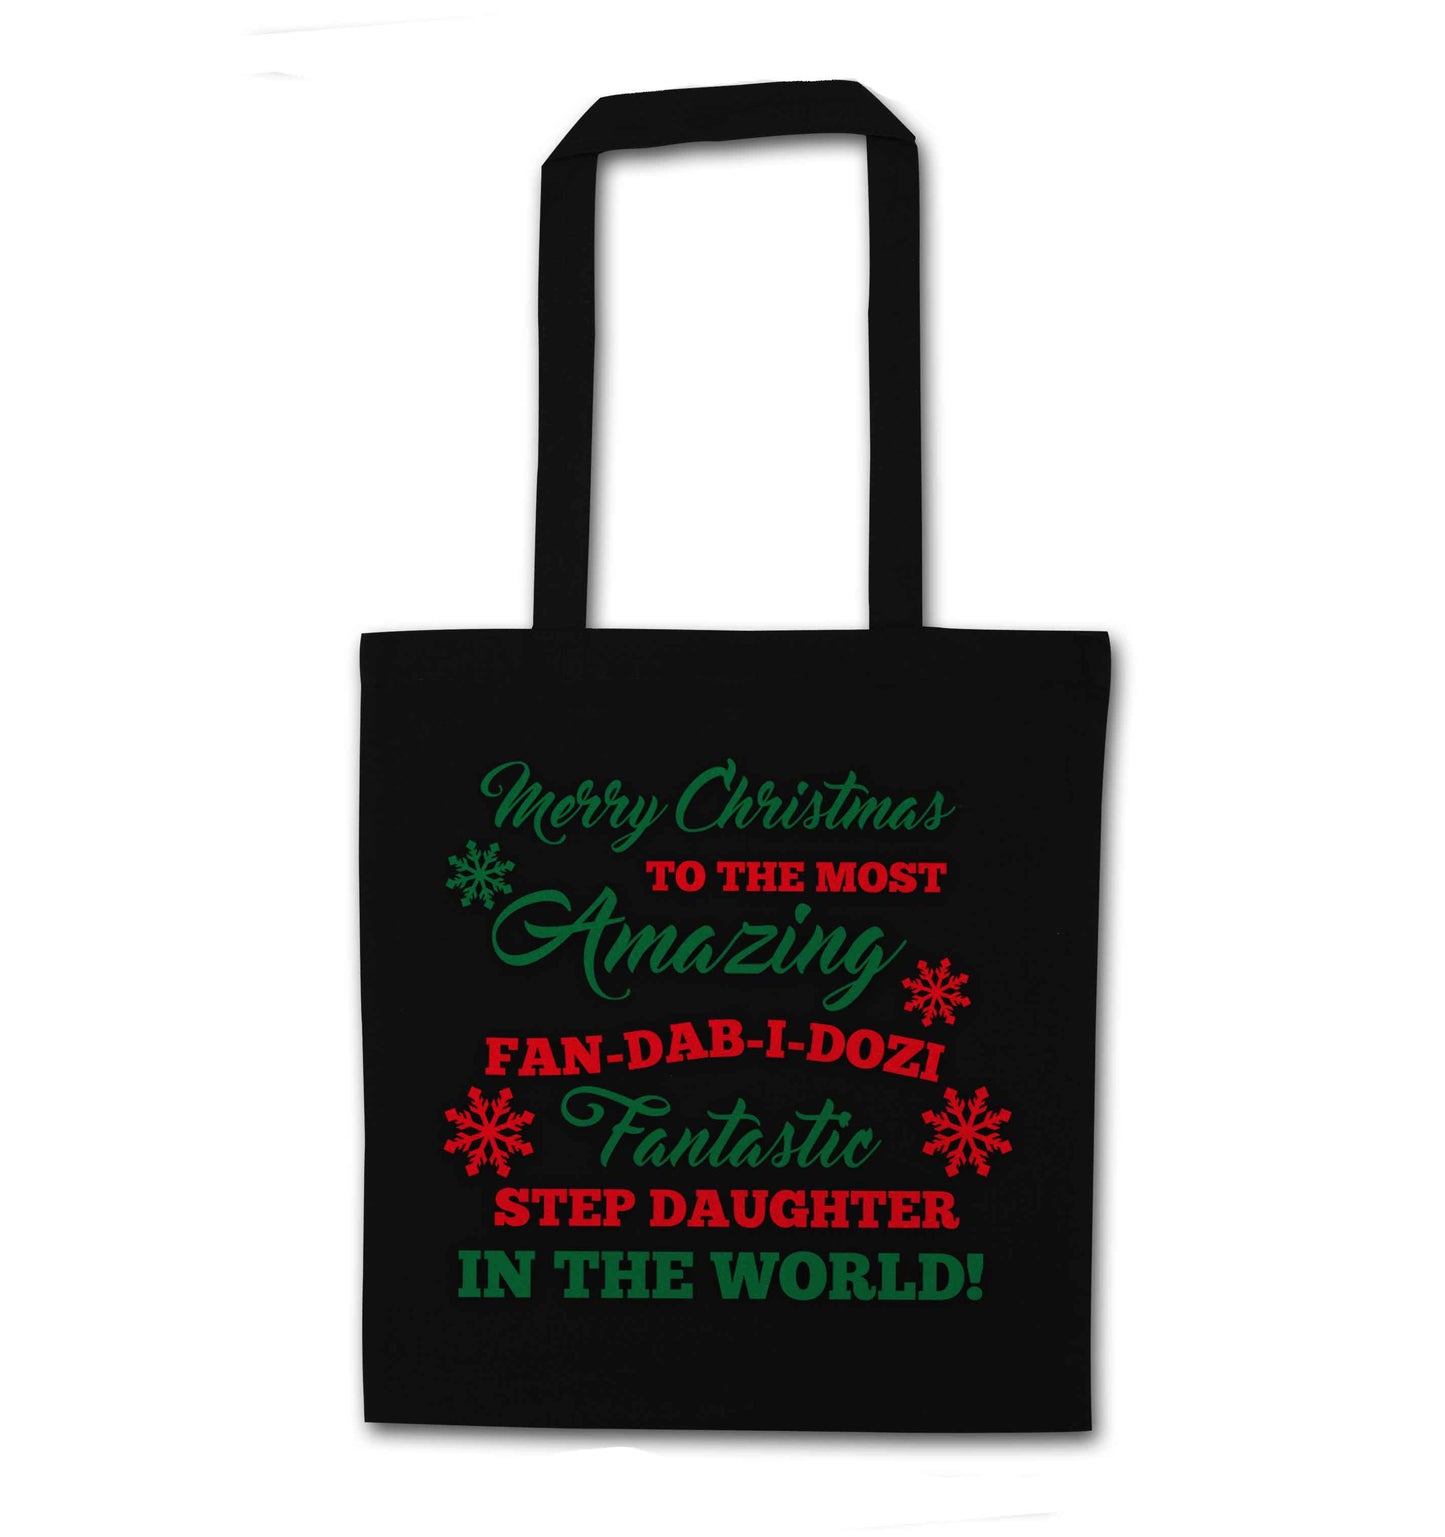 Merry Christmas to the most amazing fan-dab-i-dozi fantasic Step Daughter in the world black tote bag